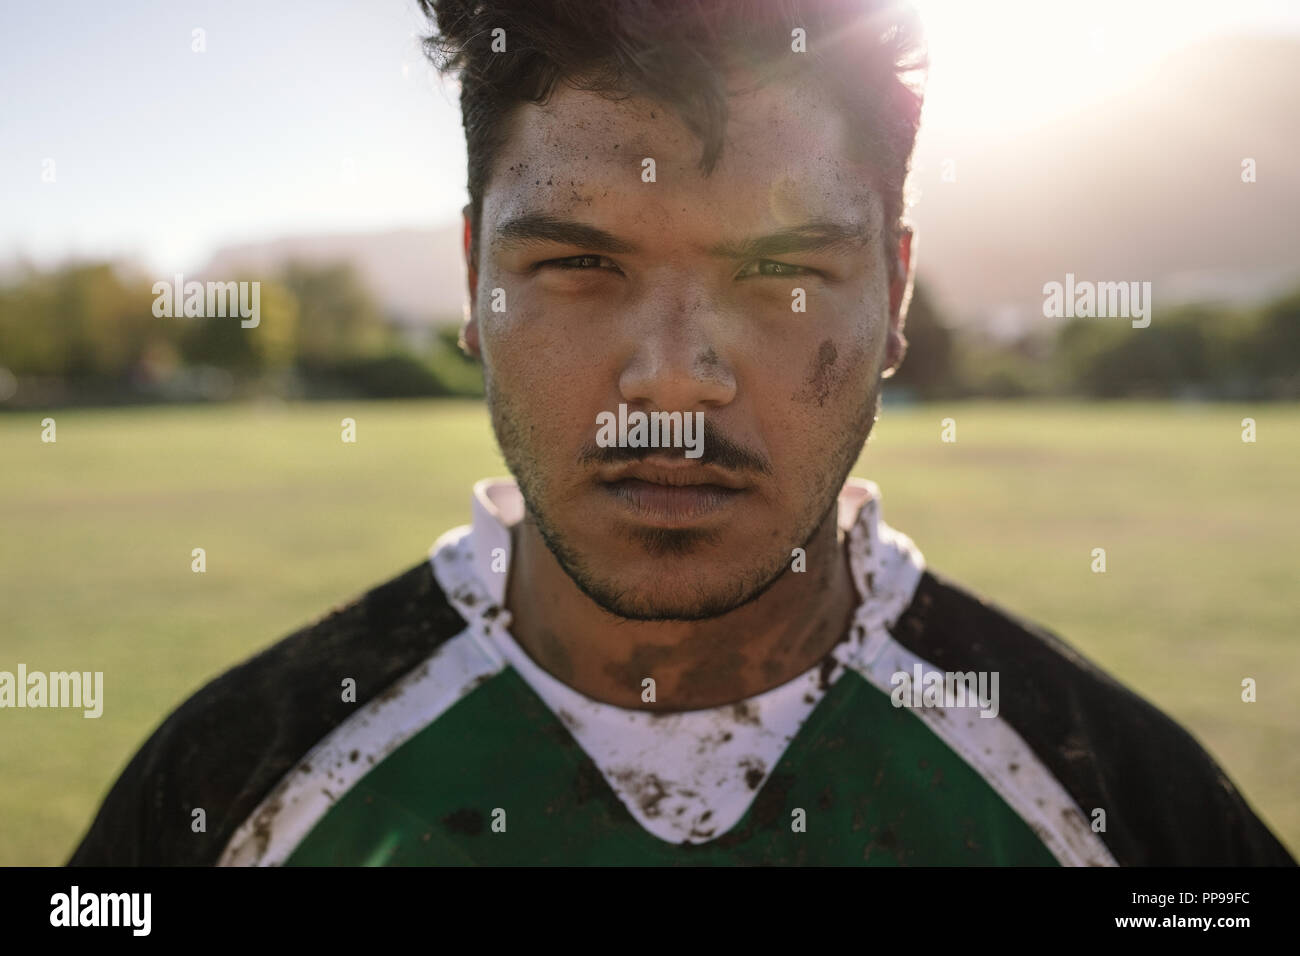 Close up portrait of rugby player with muddy face and uniform on field. Young sportsman staring at camera on ground. Stock Photo